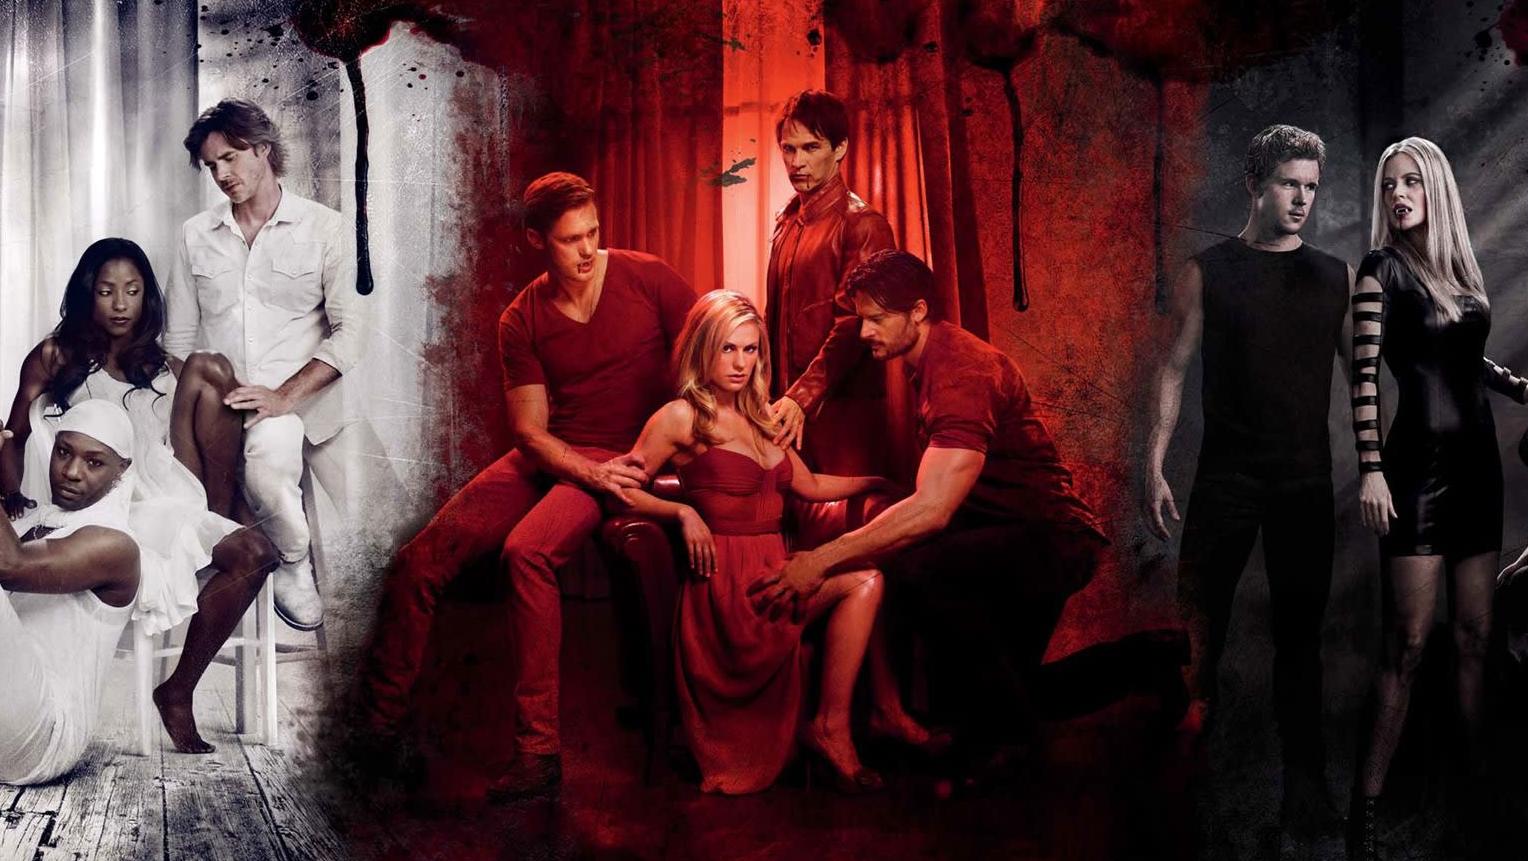 The cast of the original True Blood. (Image: HBO)